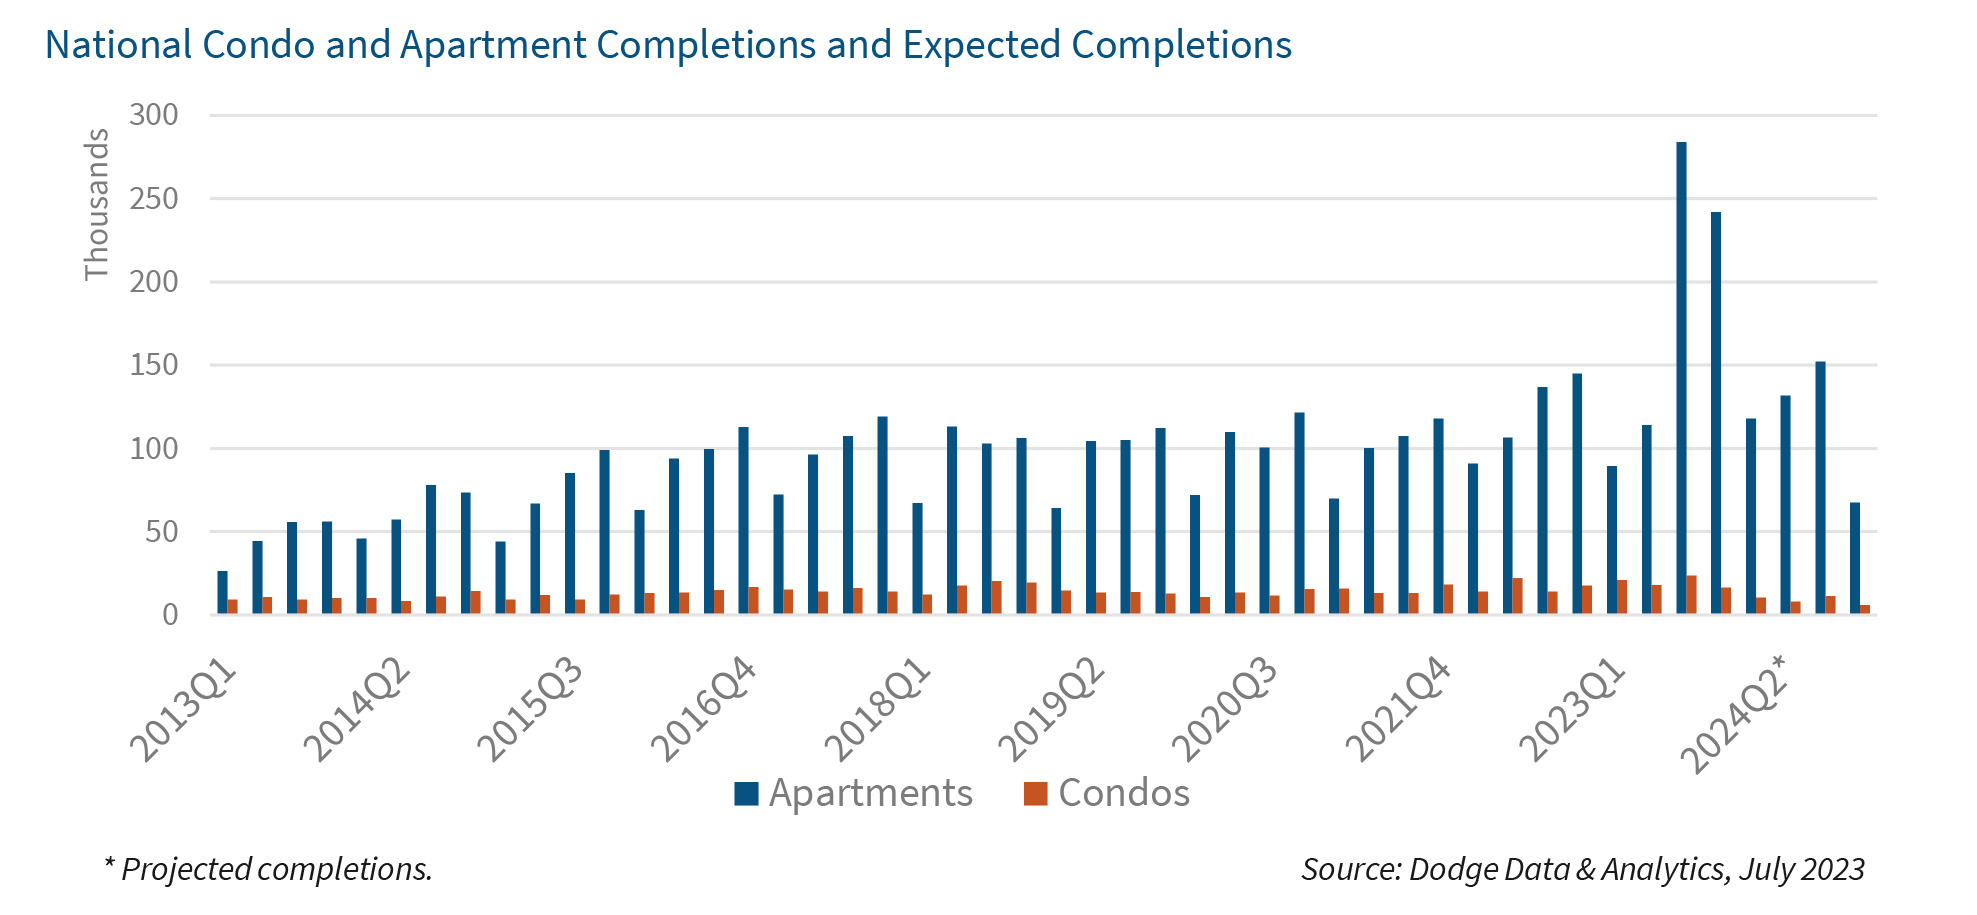 National Condo and Apartment Completions and Expected Completions